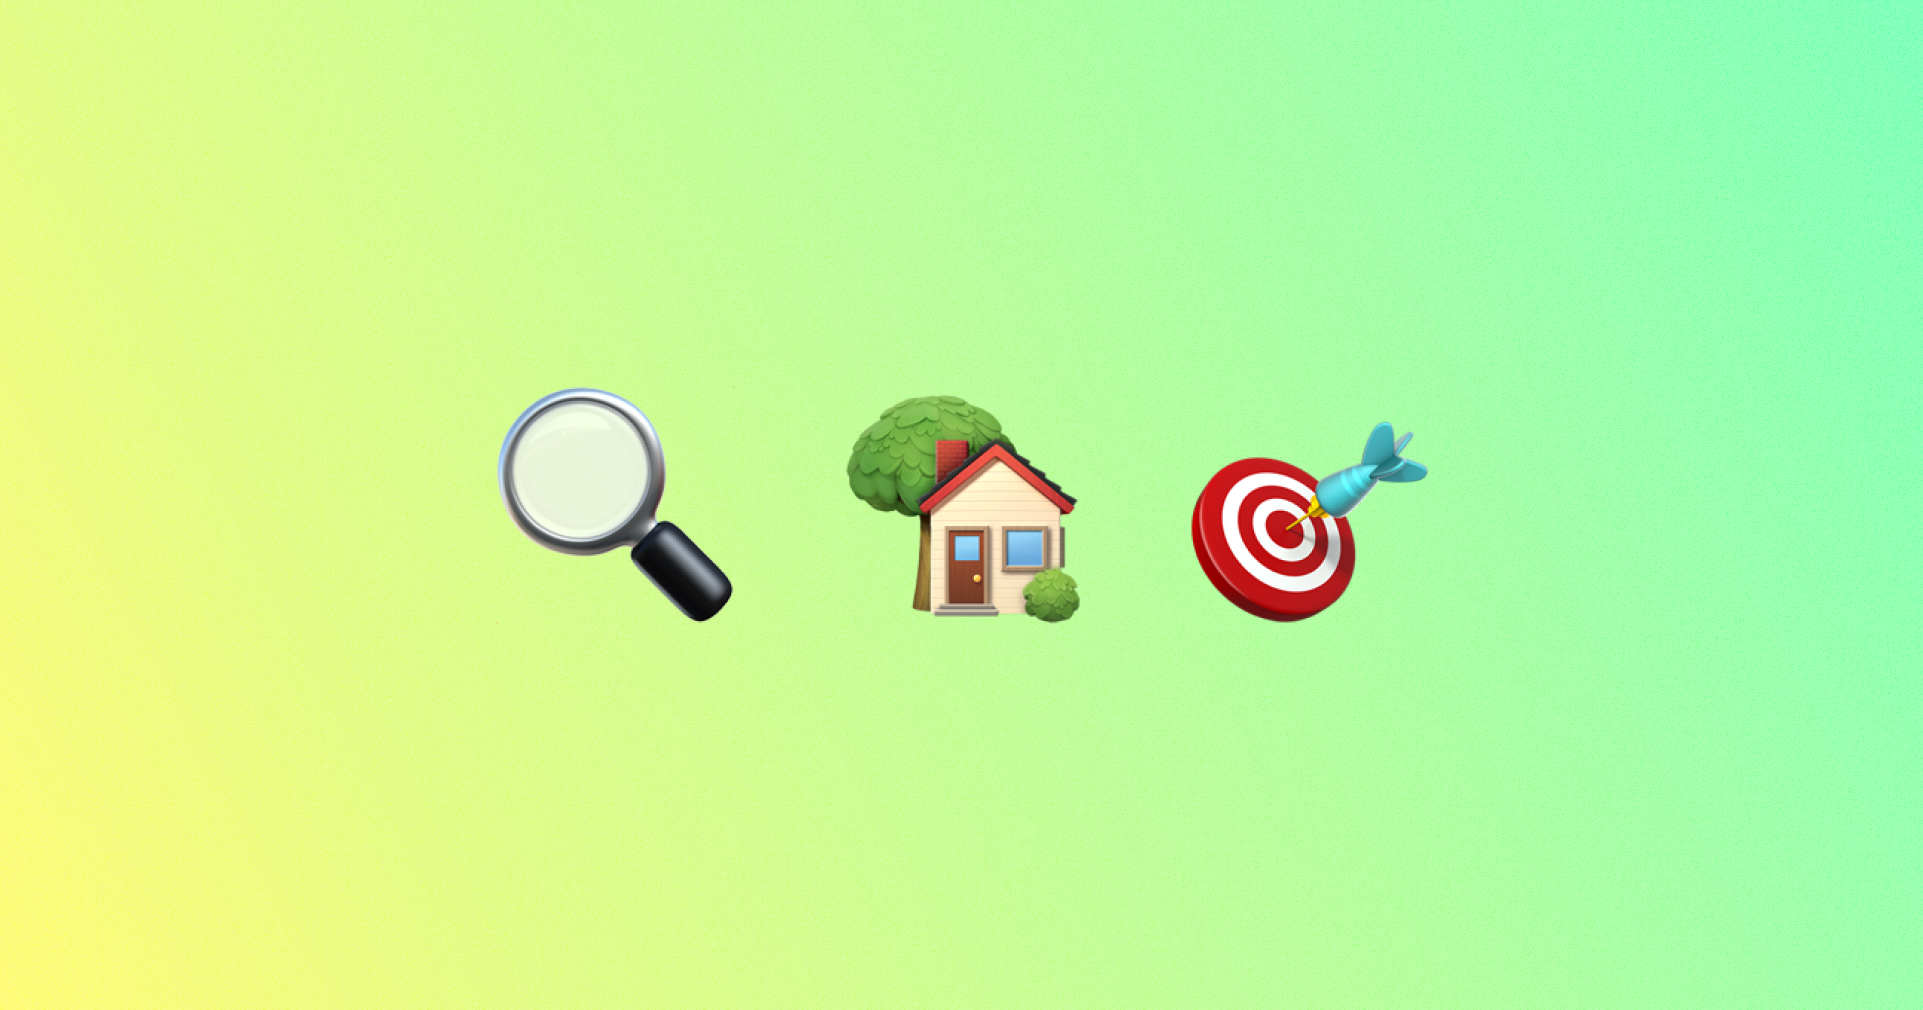 Cover photo for blog post titled Best Ways To Find A Sharehouse. Symbols containing magnifying glass, house and target.